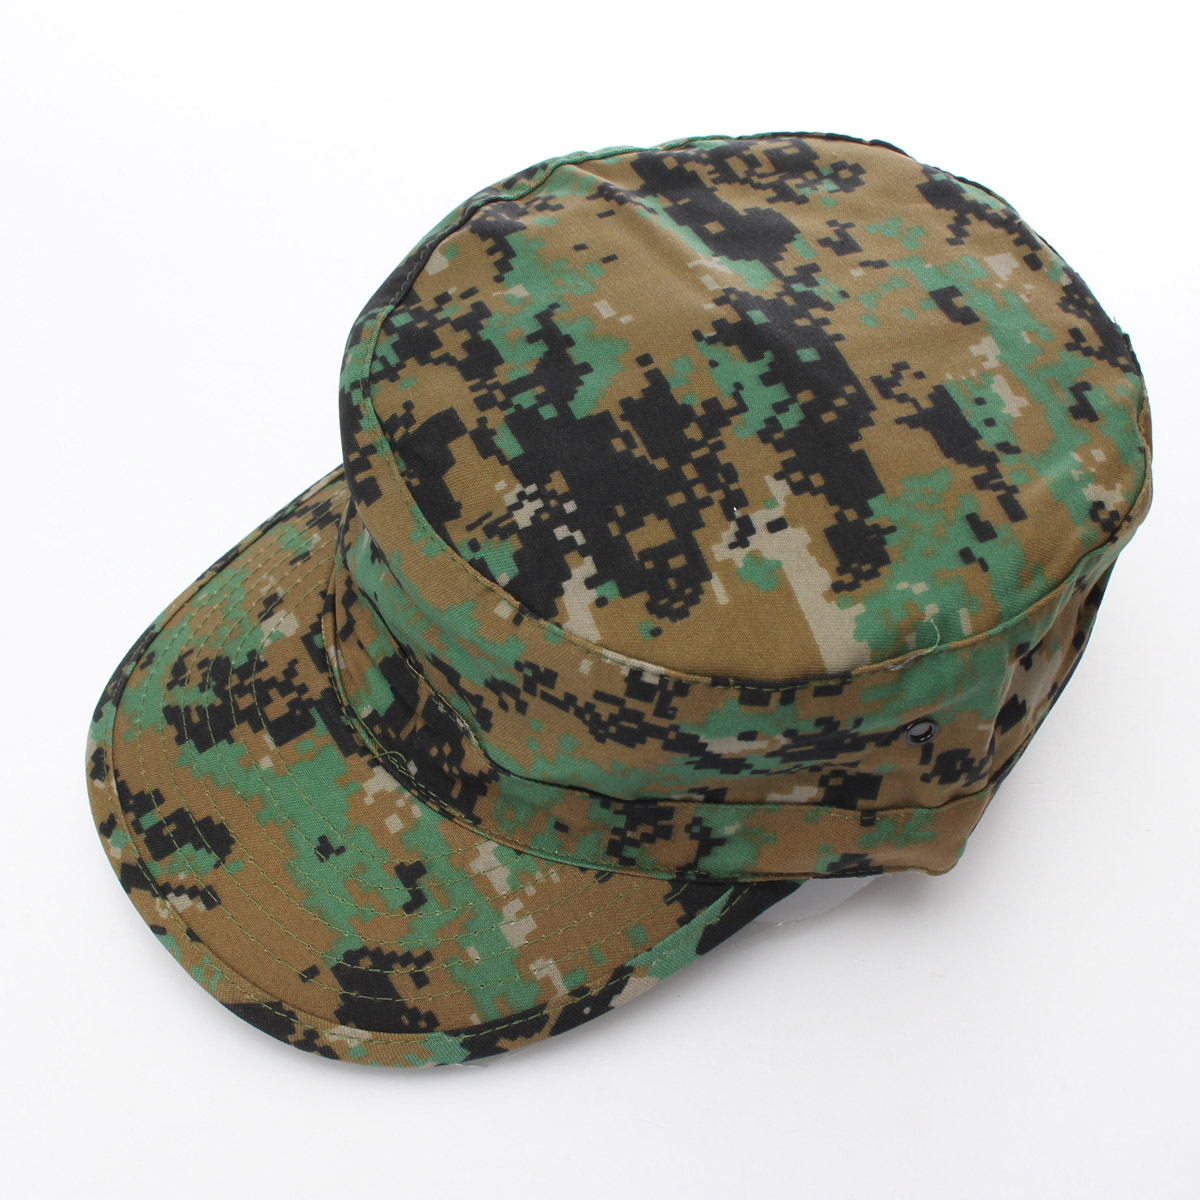 Unisex Hunting Tactical Military Patrol Cap Equipped Camouflage Flat Hat.